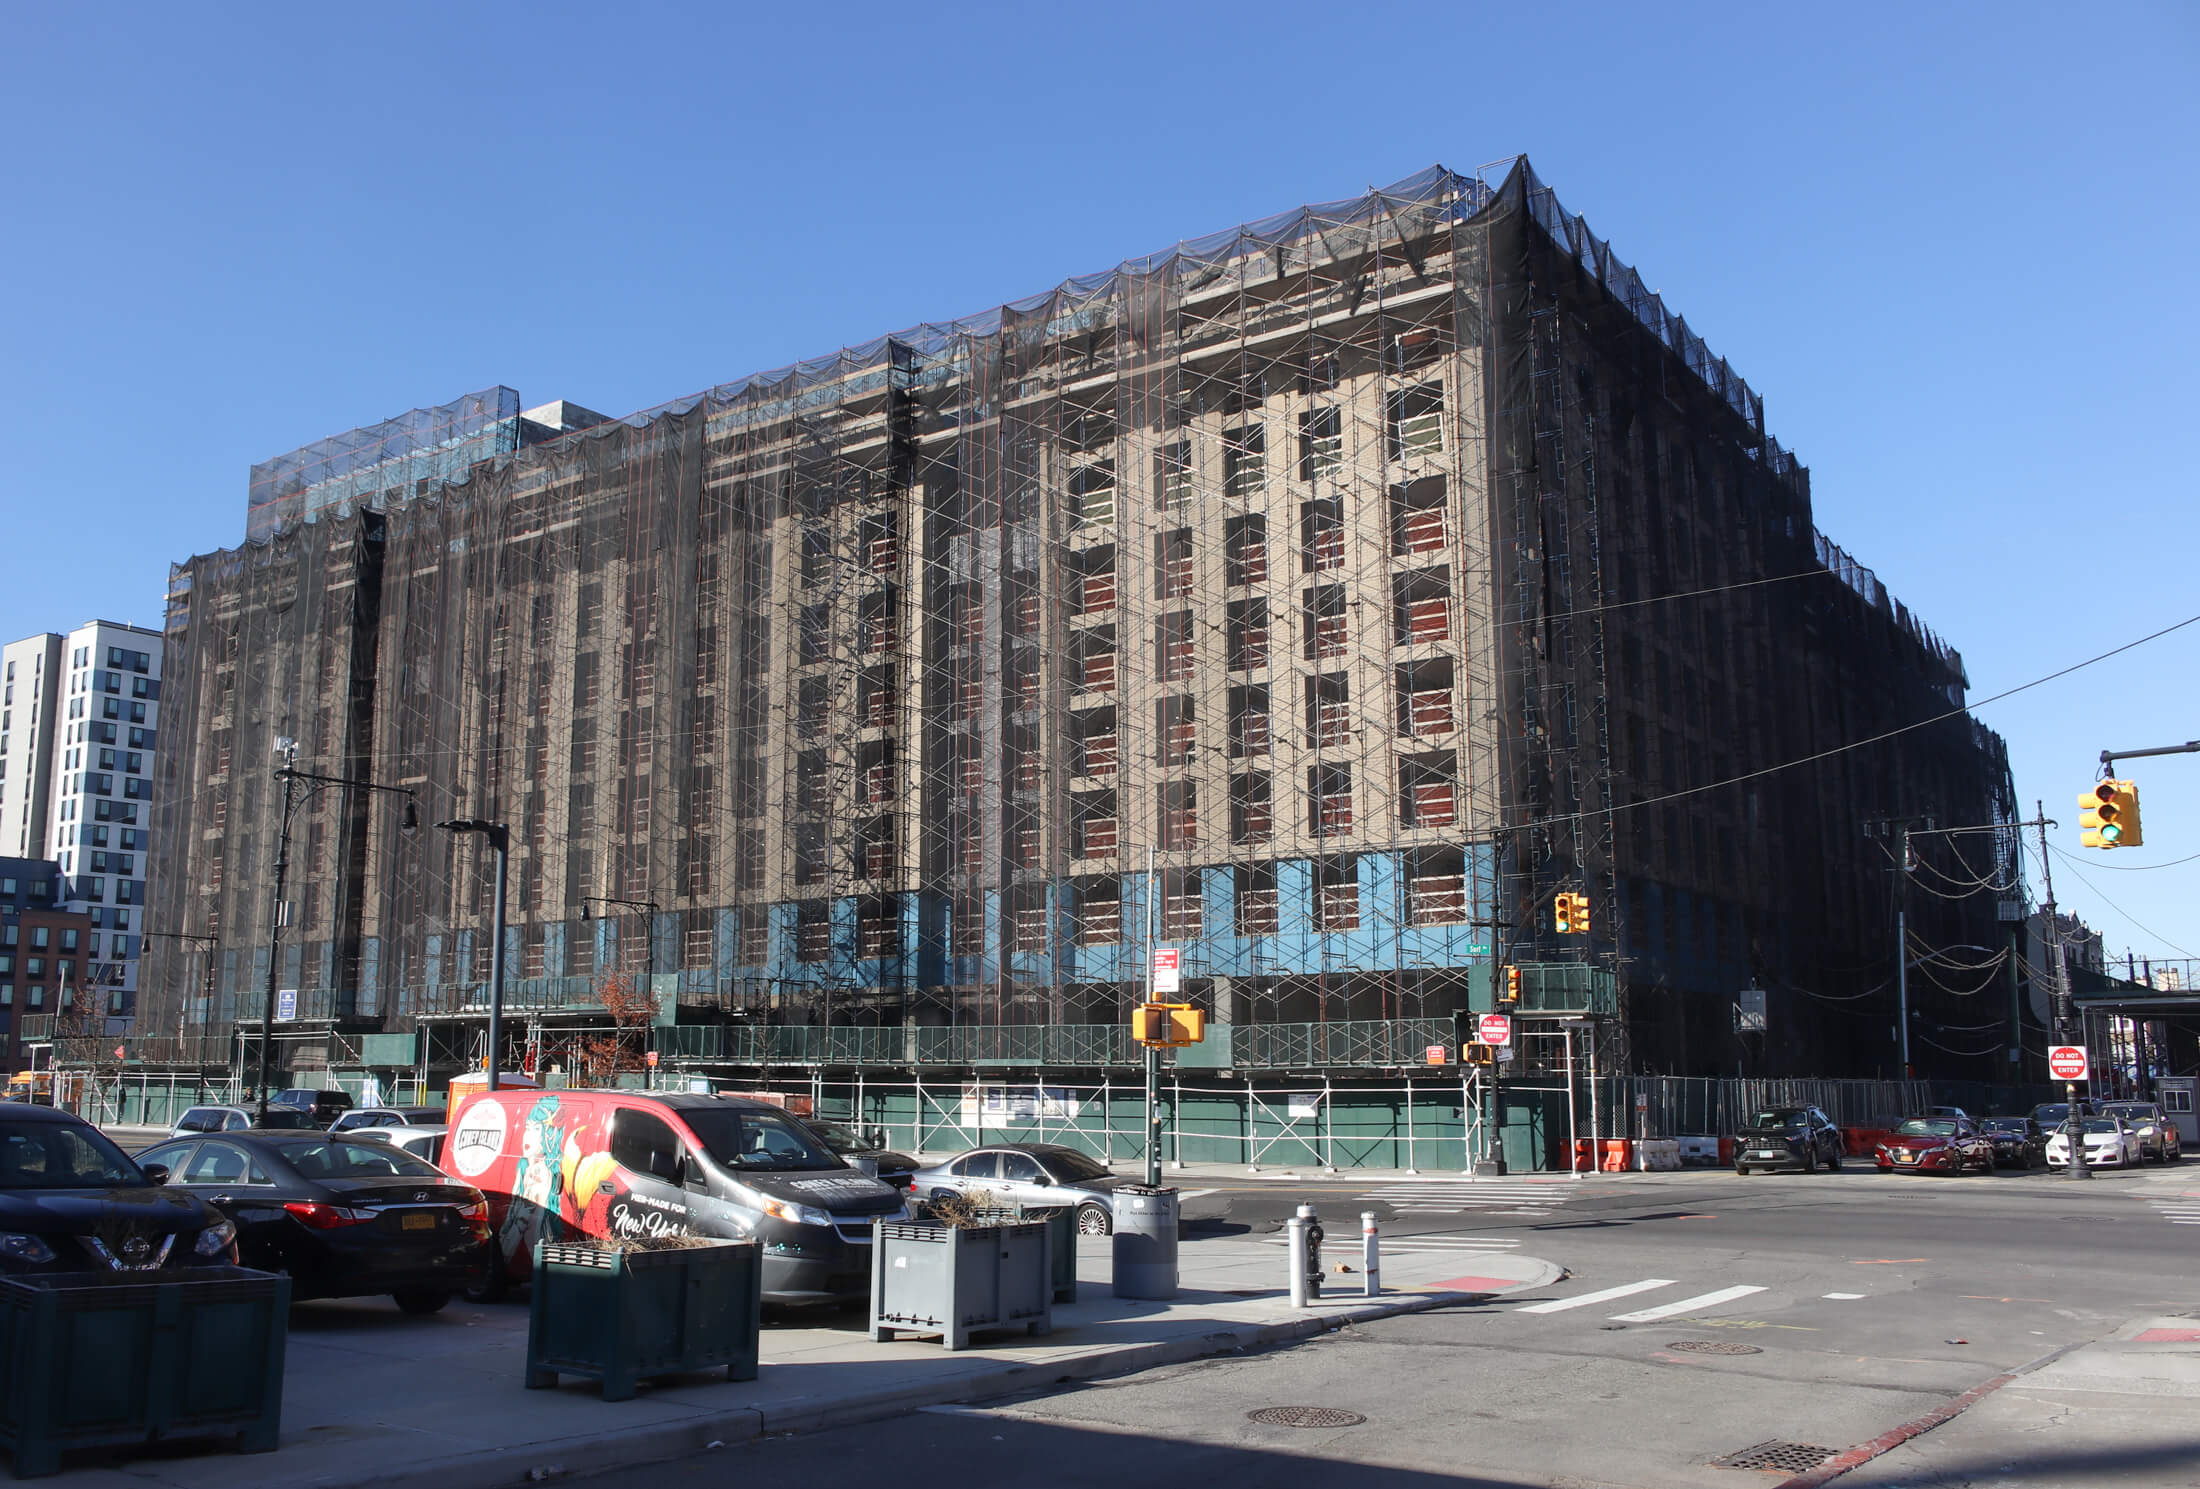 affordable housing lottery opens for the building pictured under scaffolding and netting